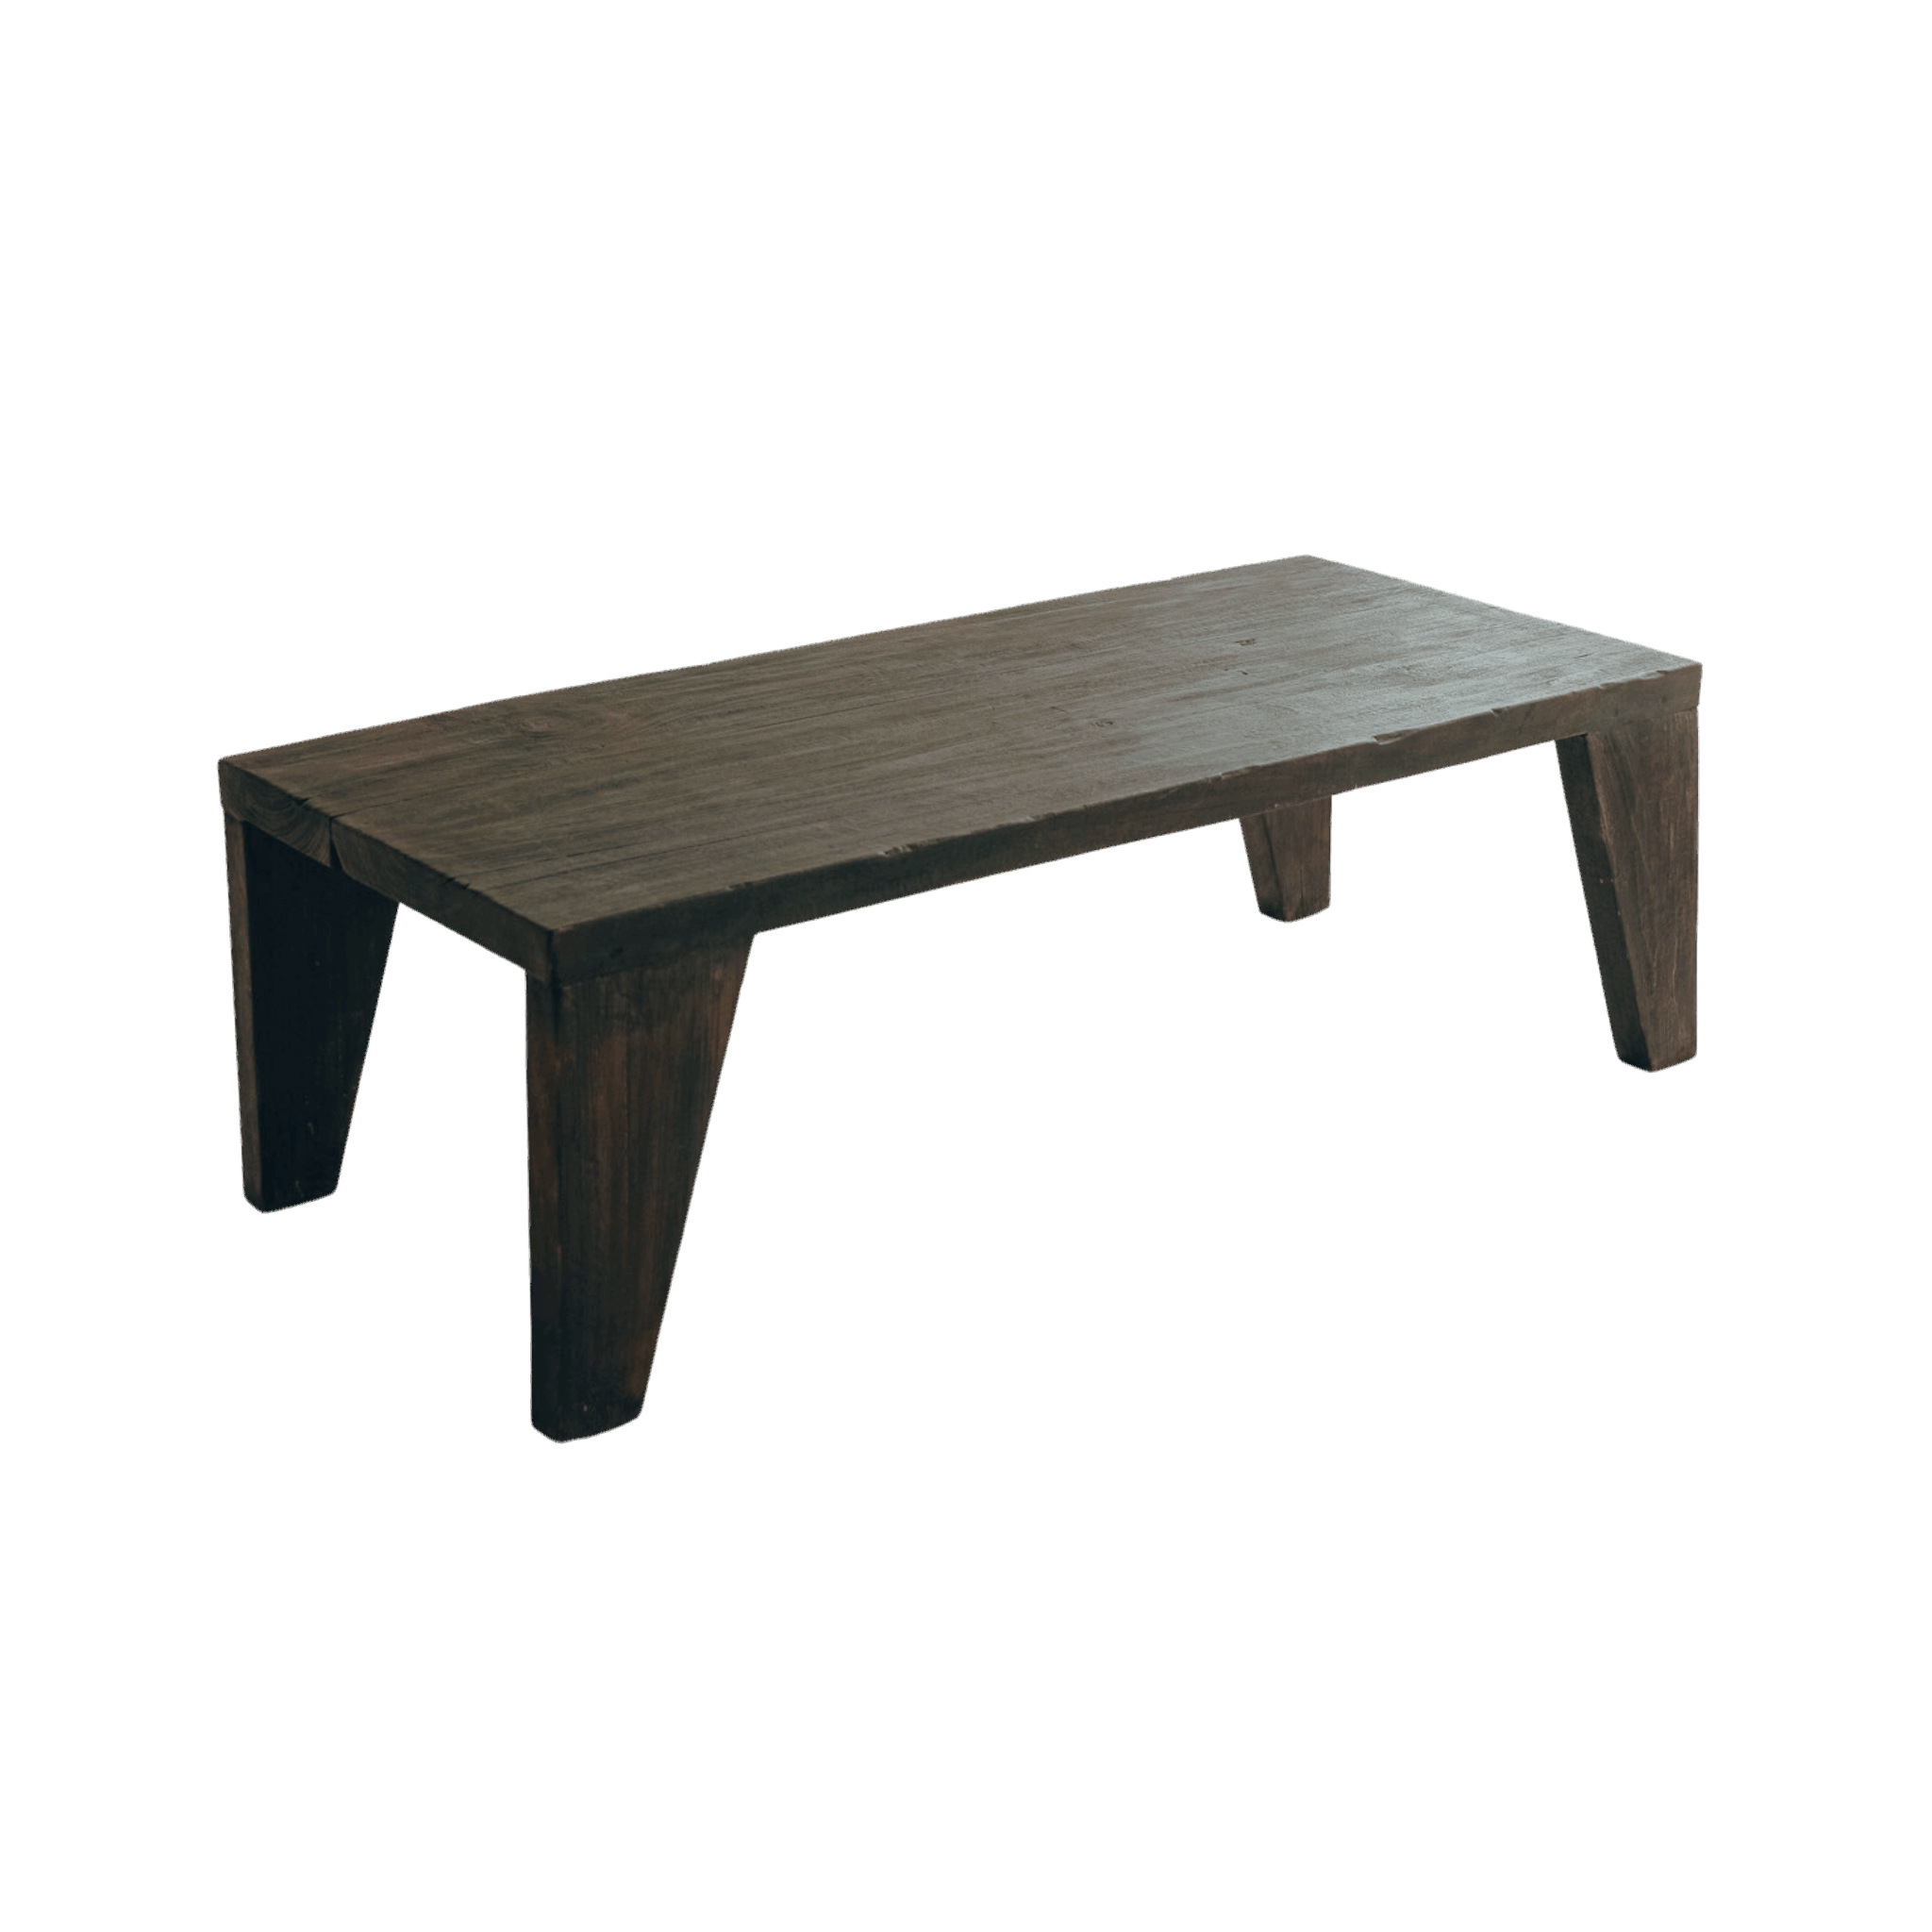 THE ALONSO TABLE